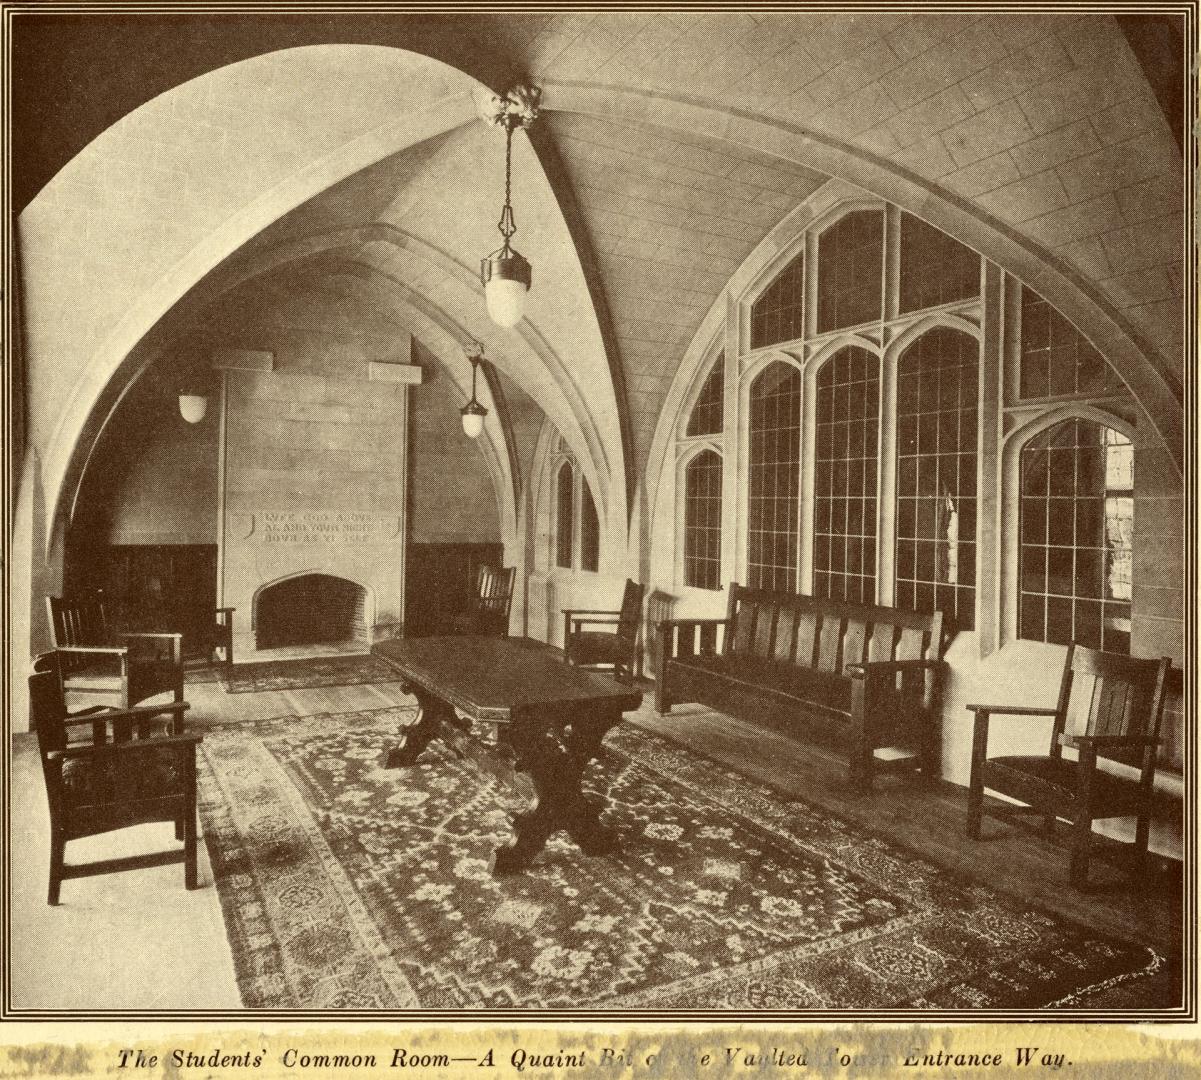 Knox College (opened 1915), Interior, common room (students')